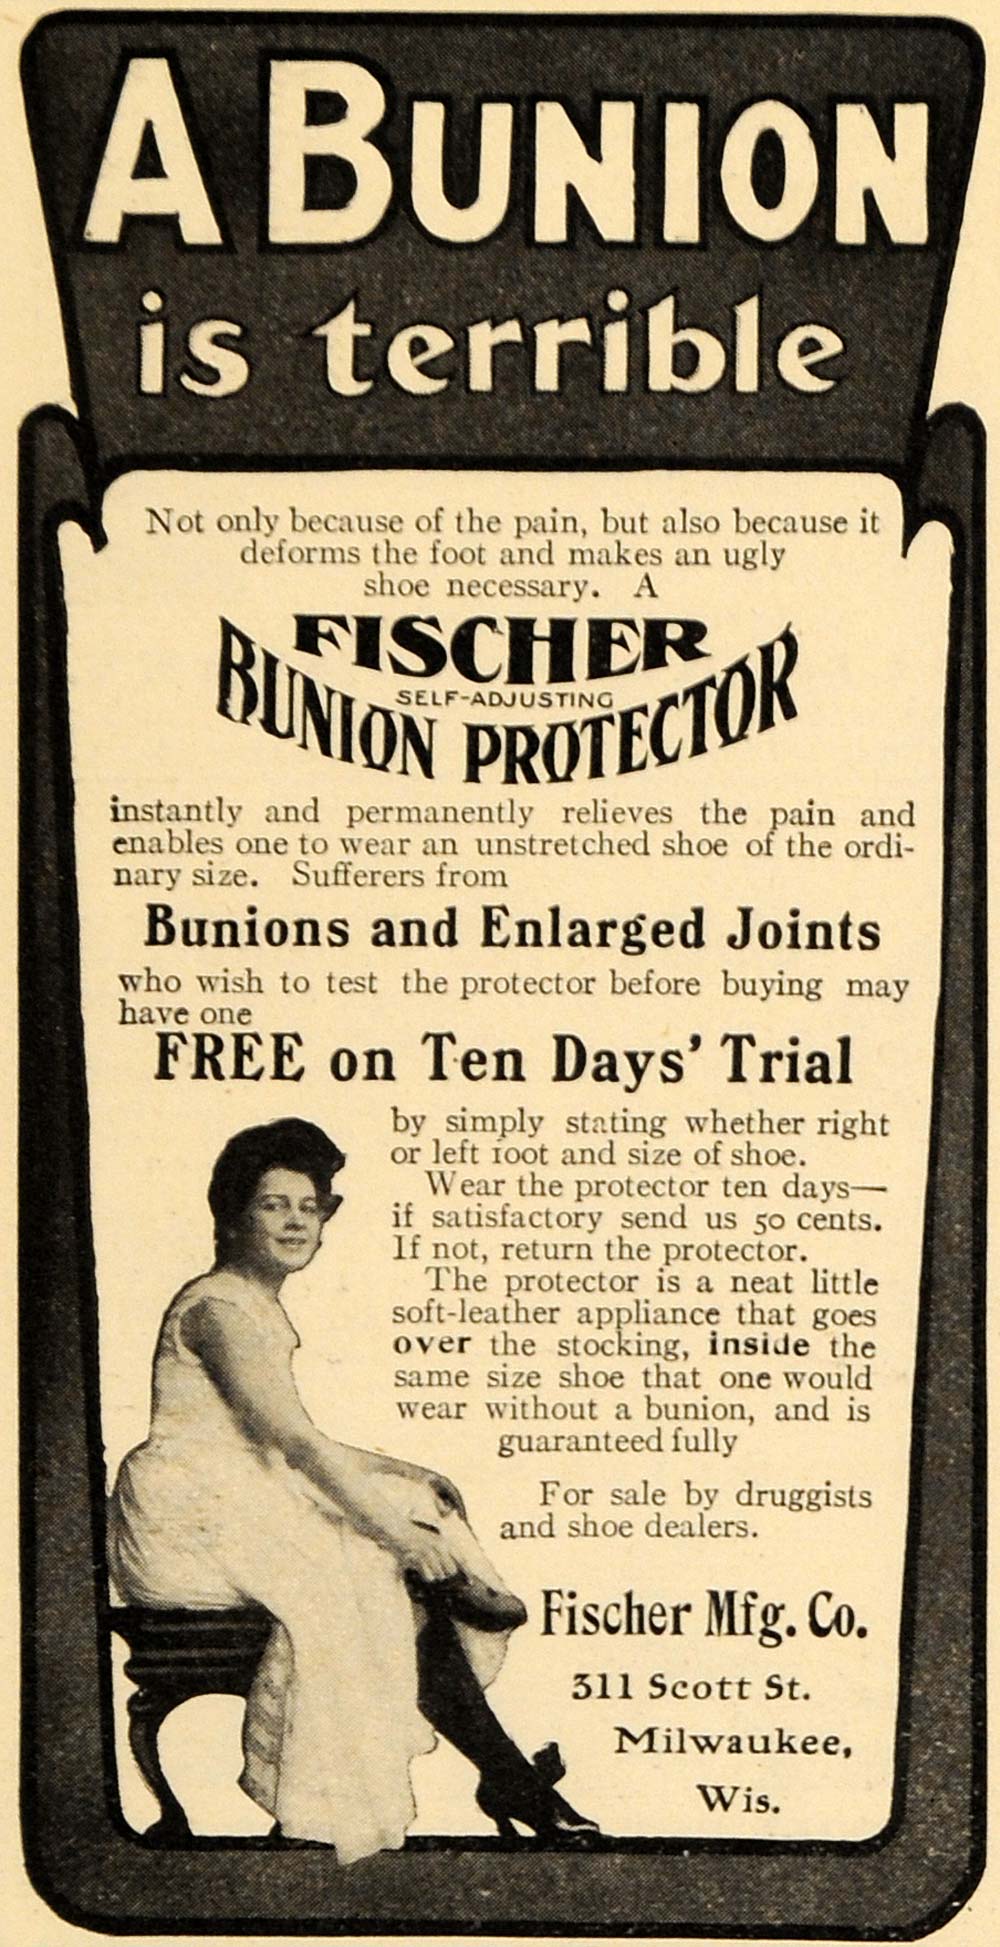 1905 Ad Fischer Bunion & Enlarged Joints Protector WI - ORIGINAL ADVERTISING EM2